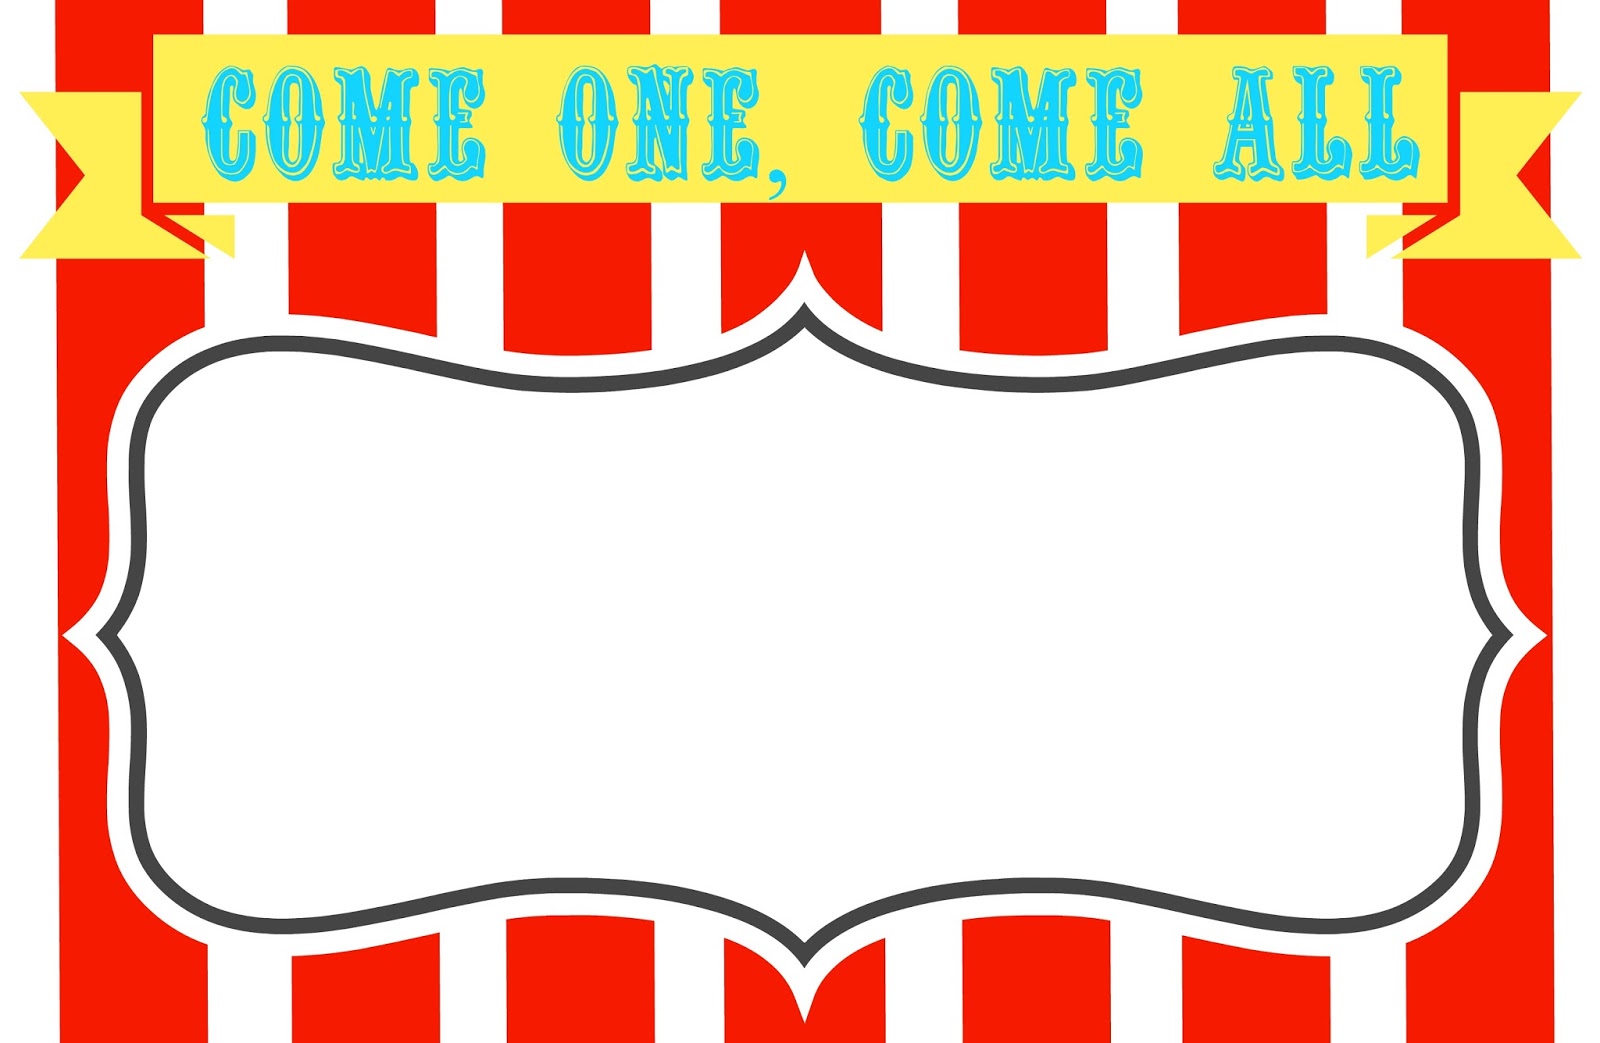 carnival-signage-carnival-signs-carnival-birthday-party-theme-carnival-themed-party